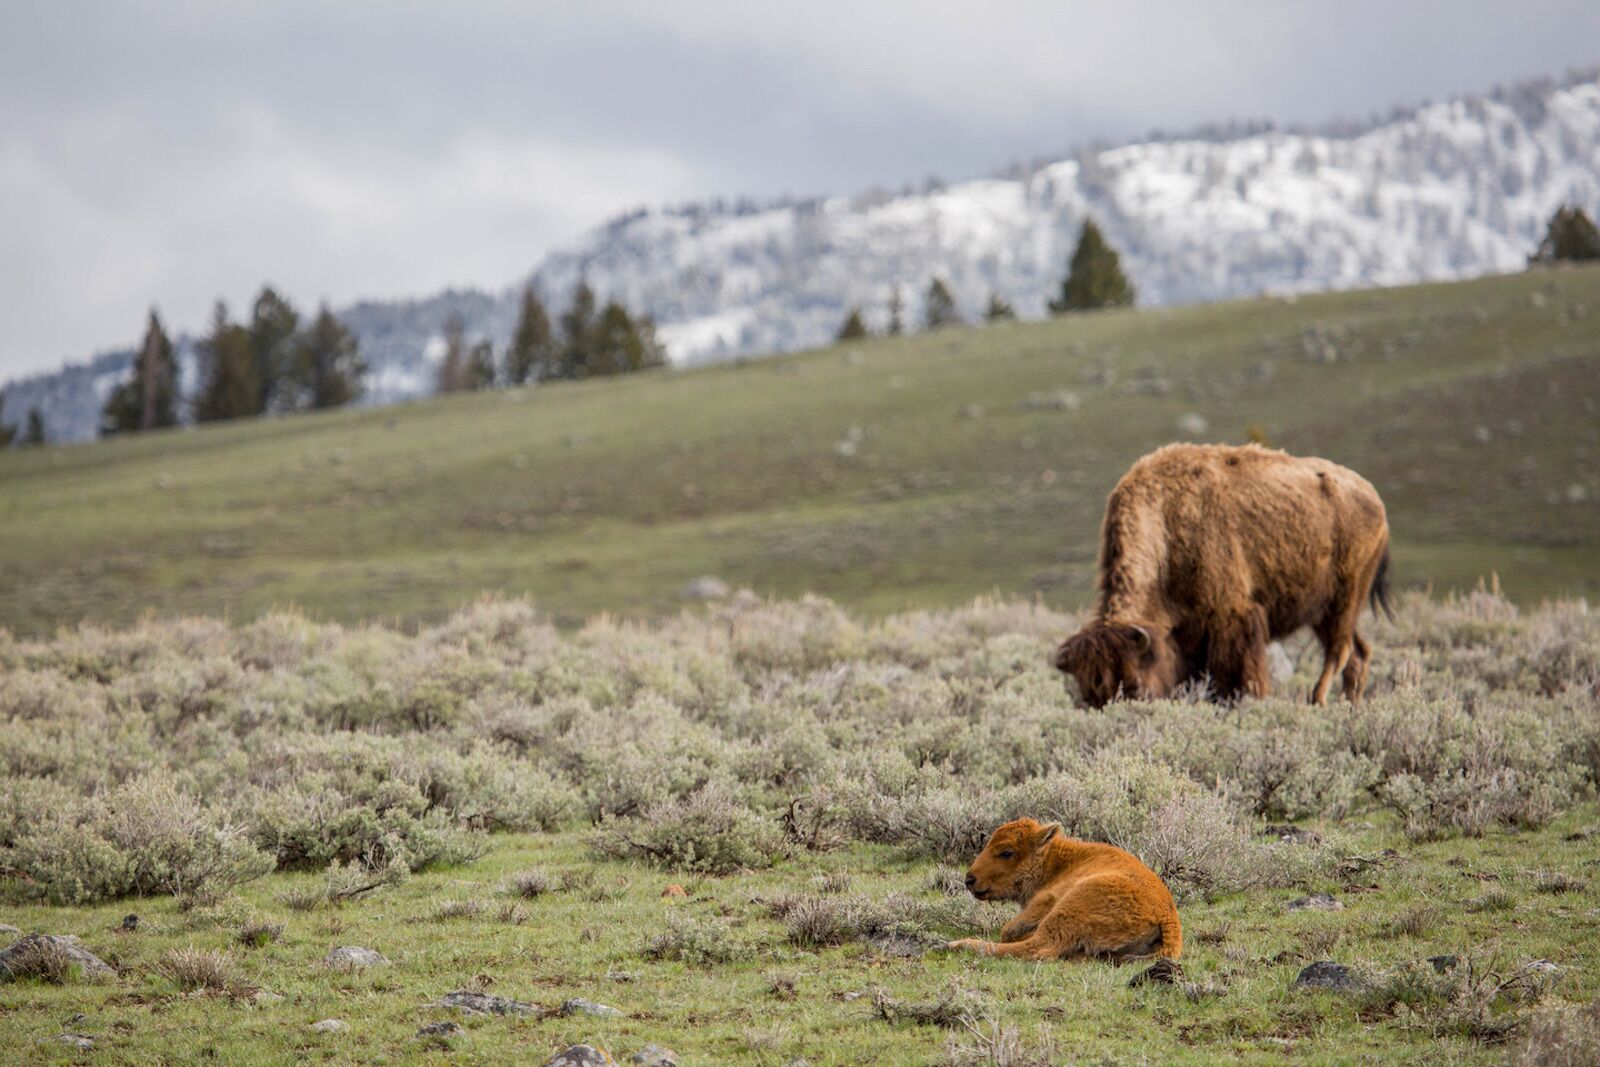 baby calf - best time to visit yellowstone to see them is spring